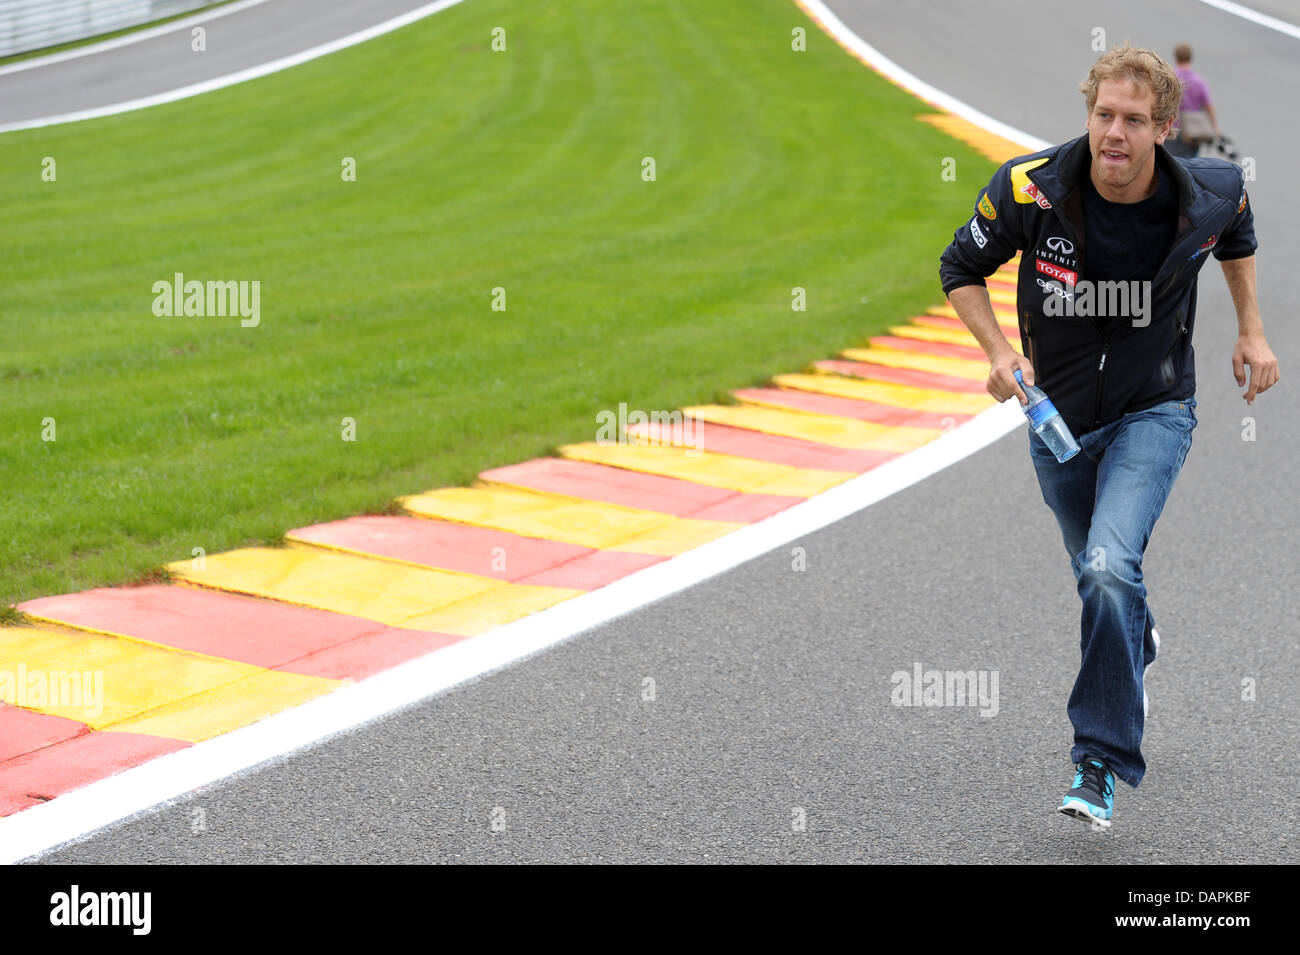 German Formula One driver Sebastian Vettel of Red Bull walks up the Eau Rouge corner at the race track Circuit de Spa-Francorchamps near Spa, Belgium, 25 August 2011. The Formula One Grand Prix of Belgium will take place on 28 August 2011. Photo: David Ebener Stock Photo